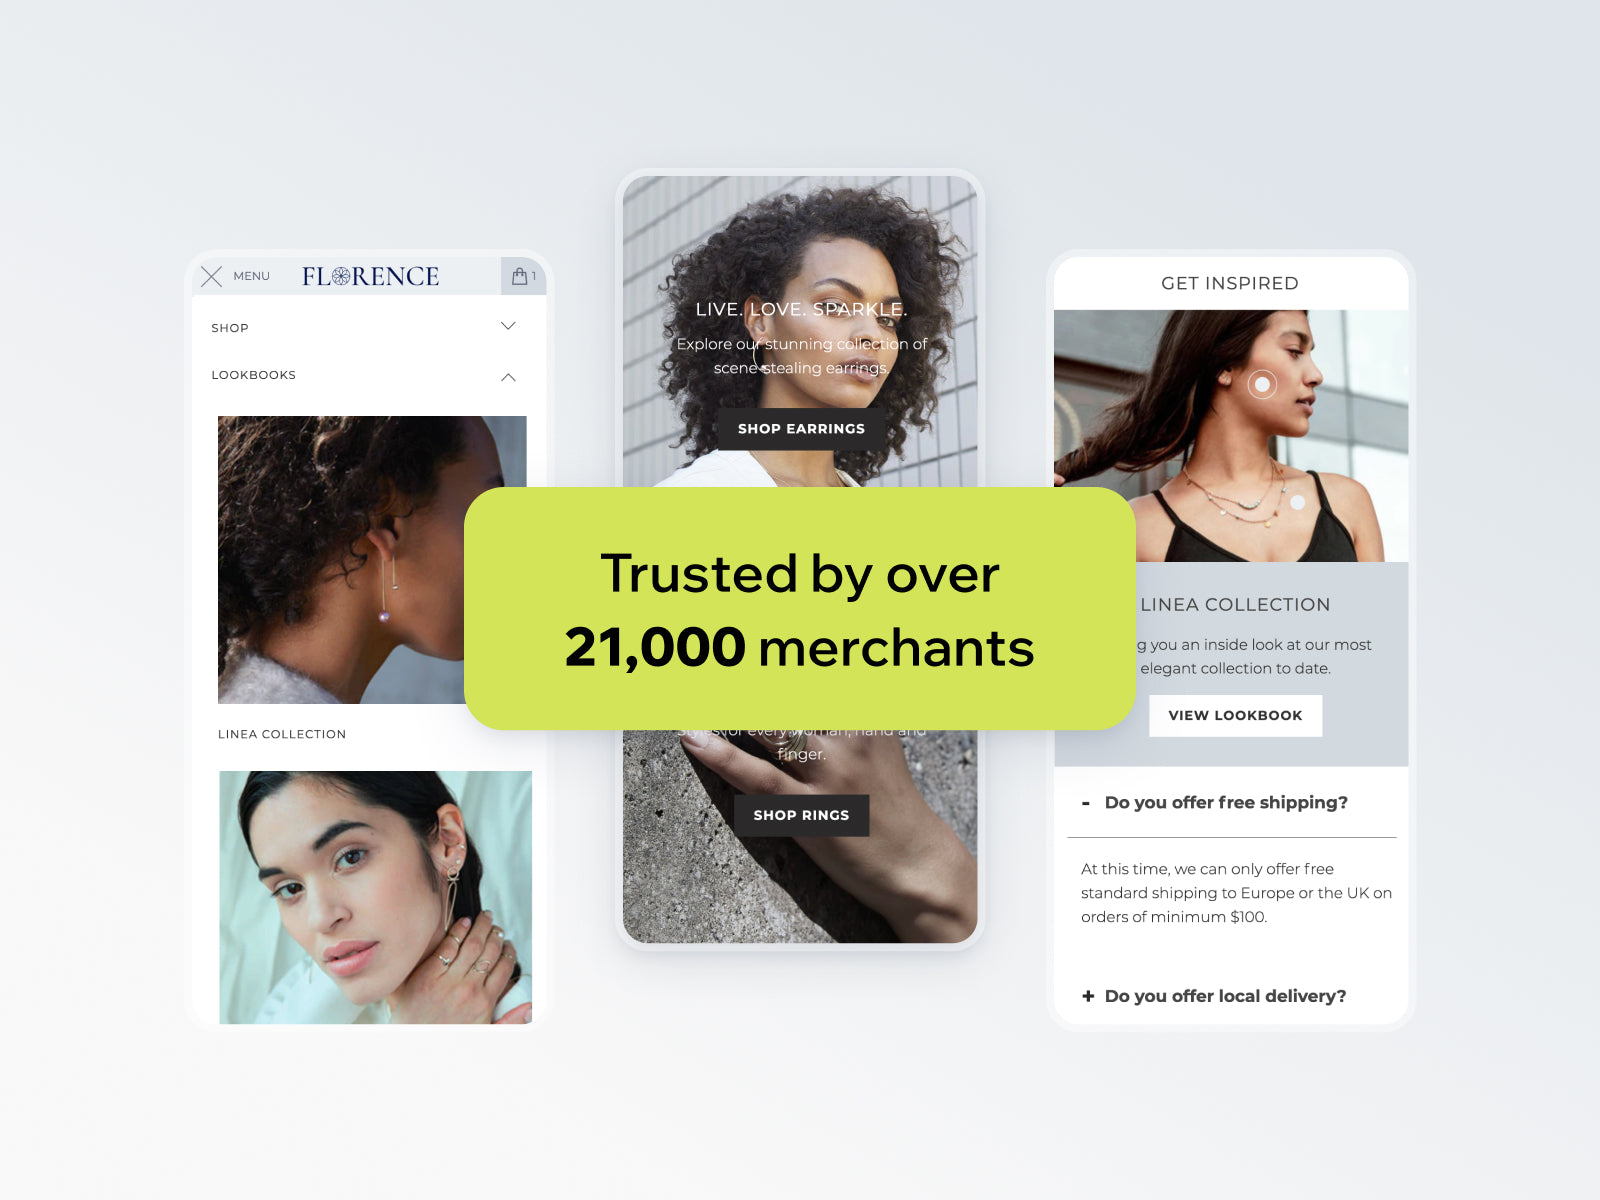 Screenshots of Turbo Shopify theme by Out of the Sandbox. Screenshot shows 3 mobile screenshots of a jewellery shop. Left: 2 in-menu images of a women wearing earrings. Center: Homepage images of woman wearing earrings and hand wearing ring. Right: Image of woman wearing necklace with shoppable hotspots and frequently asked questions about shipping.